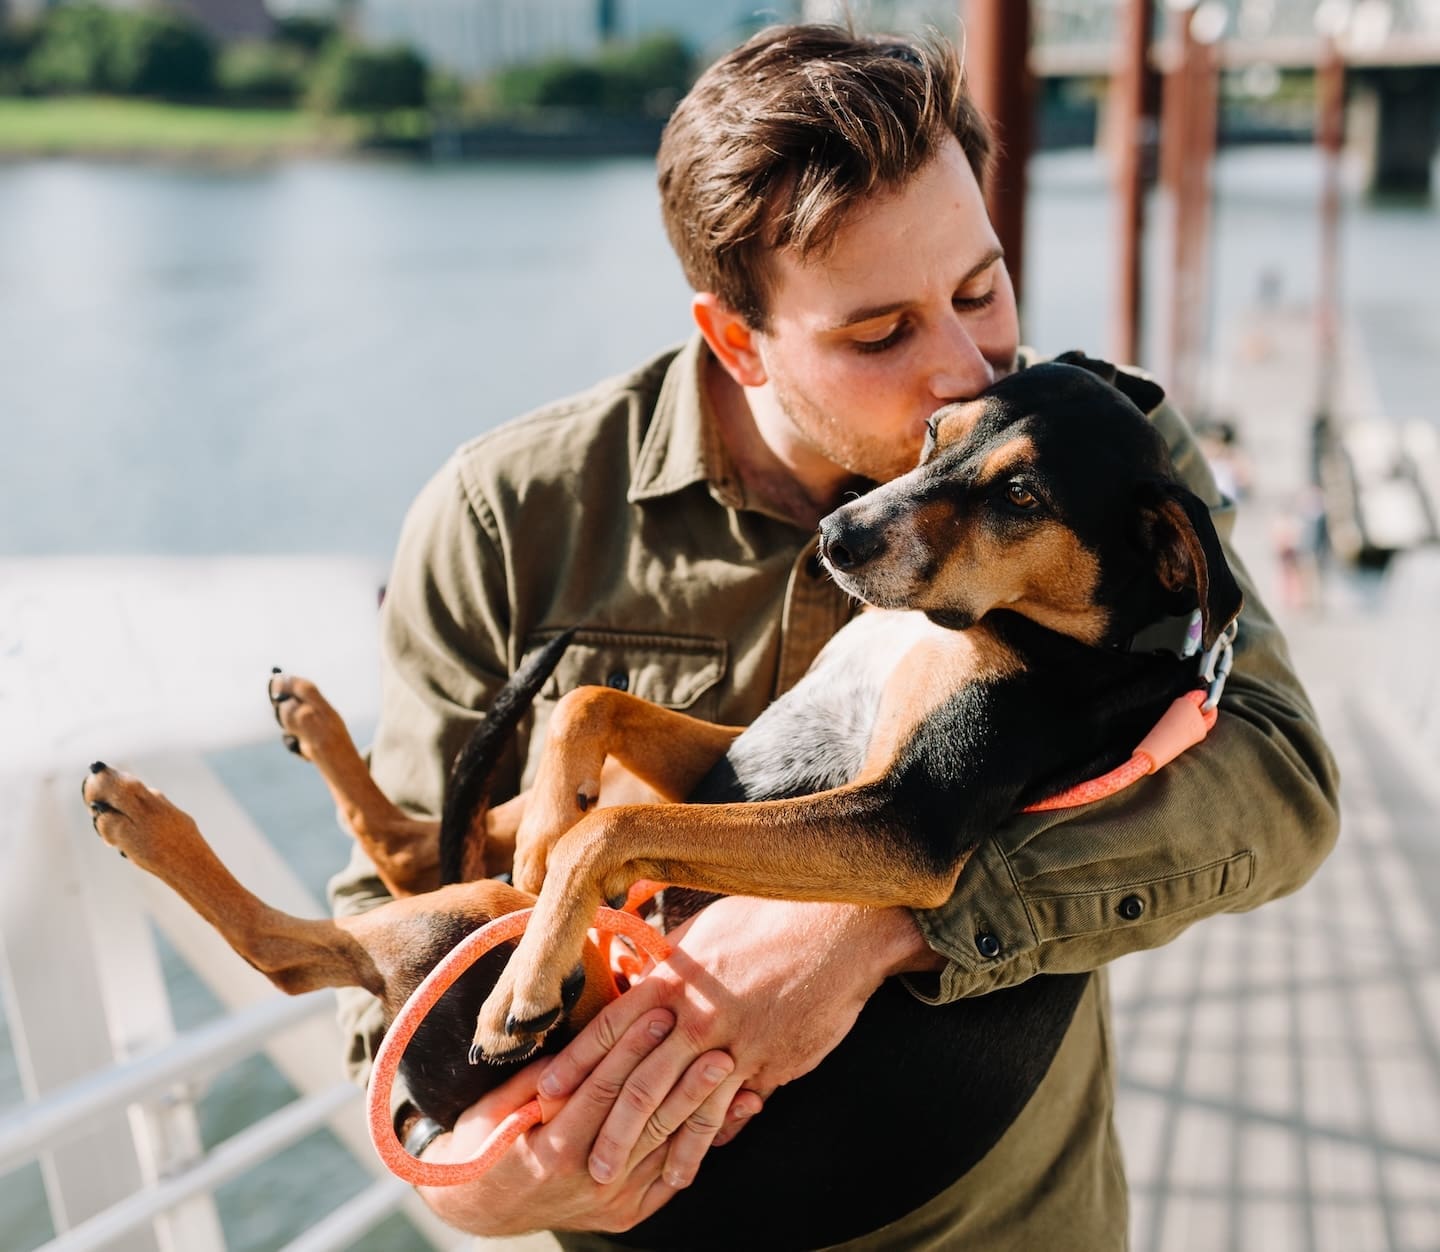 Pet retention is modeled after social services for people. (Chewy photo from Unsplash)